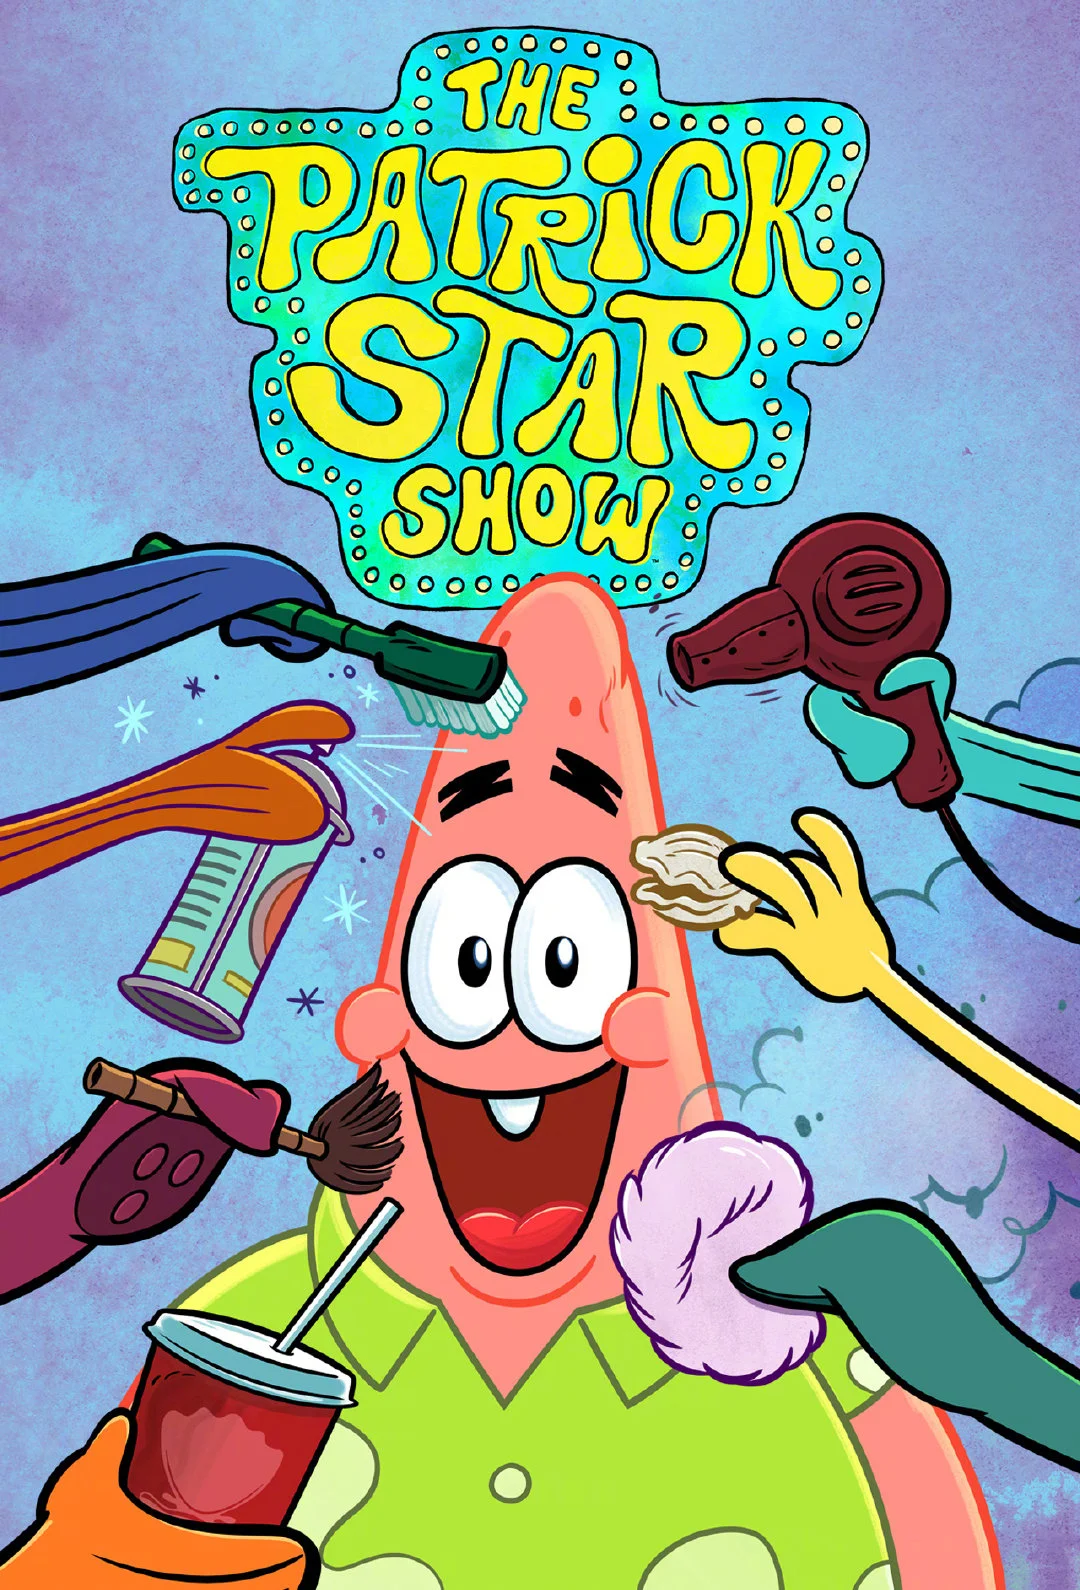 "The Patrick Star Show" renewed for second season